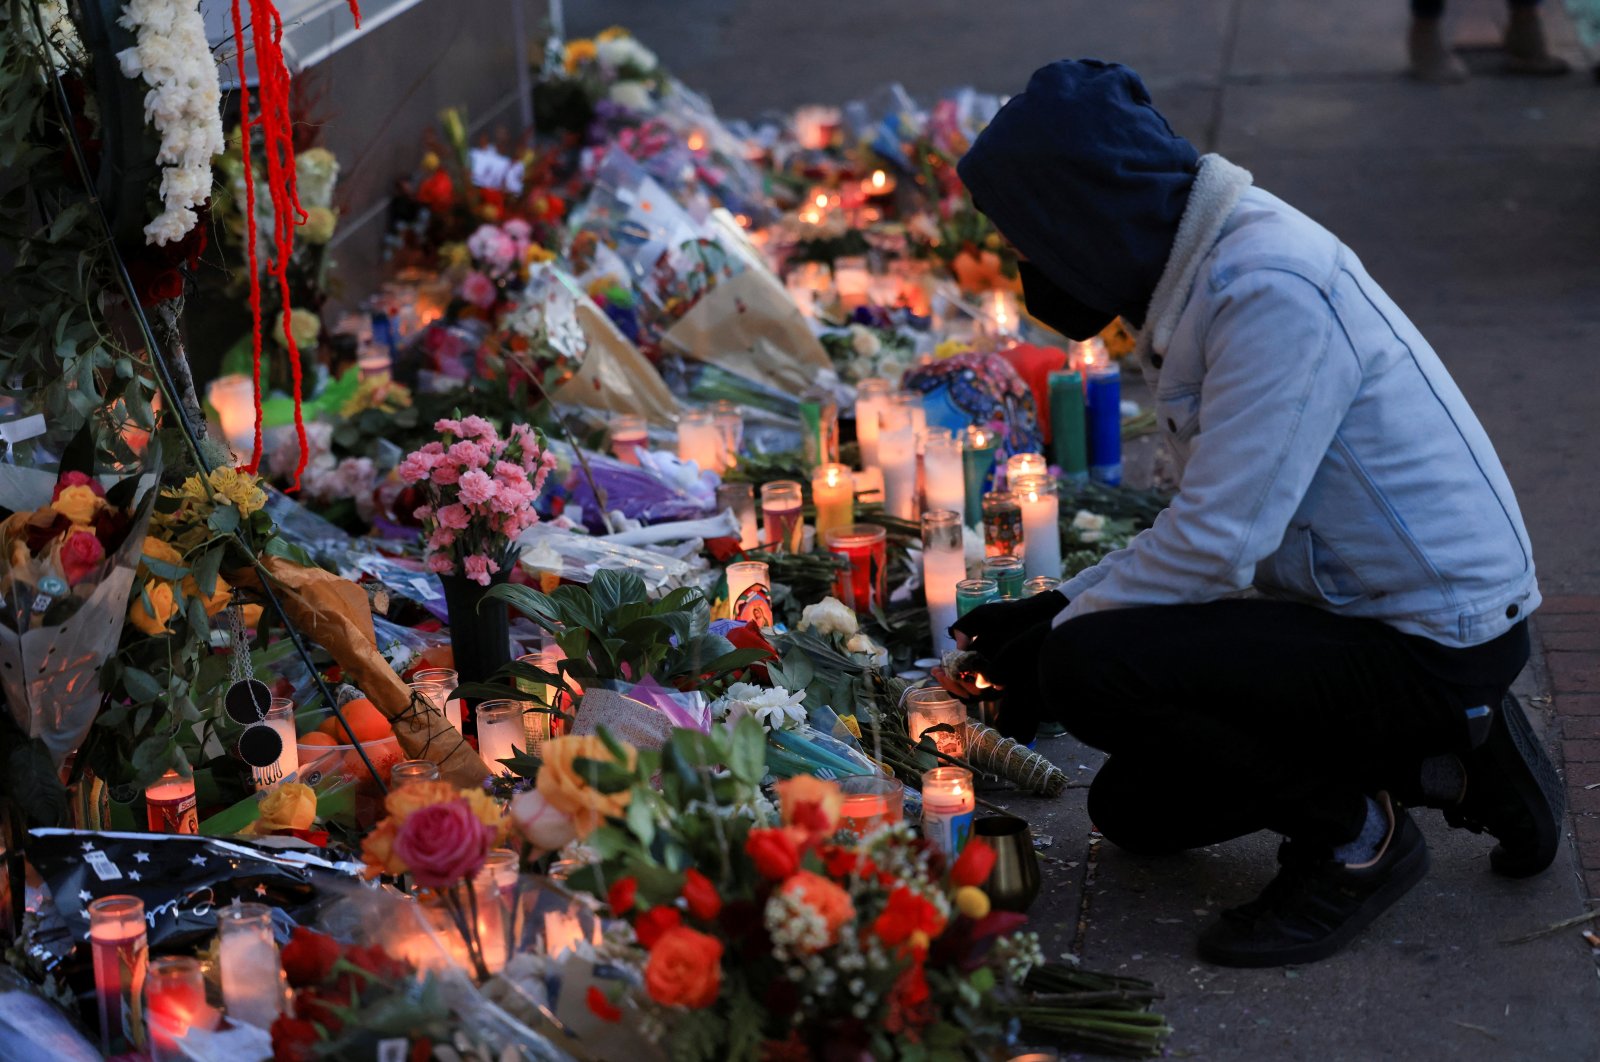 People create a memorial of candles and flowers outside the tattoo shop where owner Alicia Cardenas was killed during a shooting spree in Denver, Colorado, U.S., Dec. 29, 2021. (Reuters Photo)